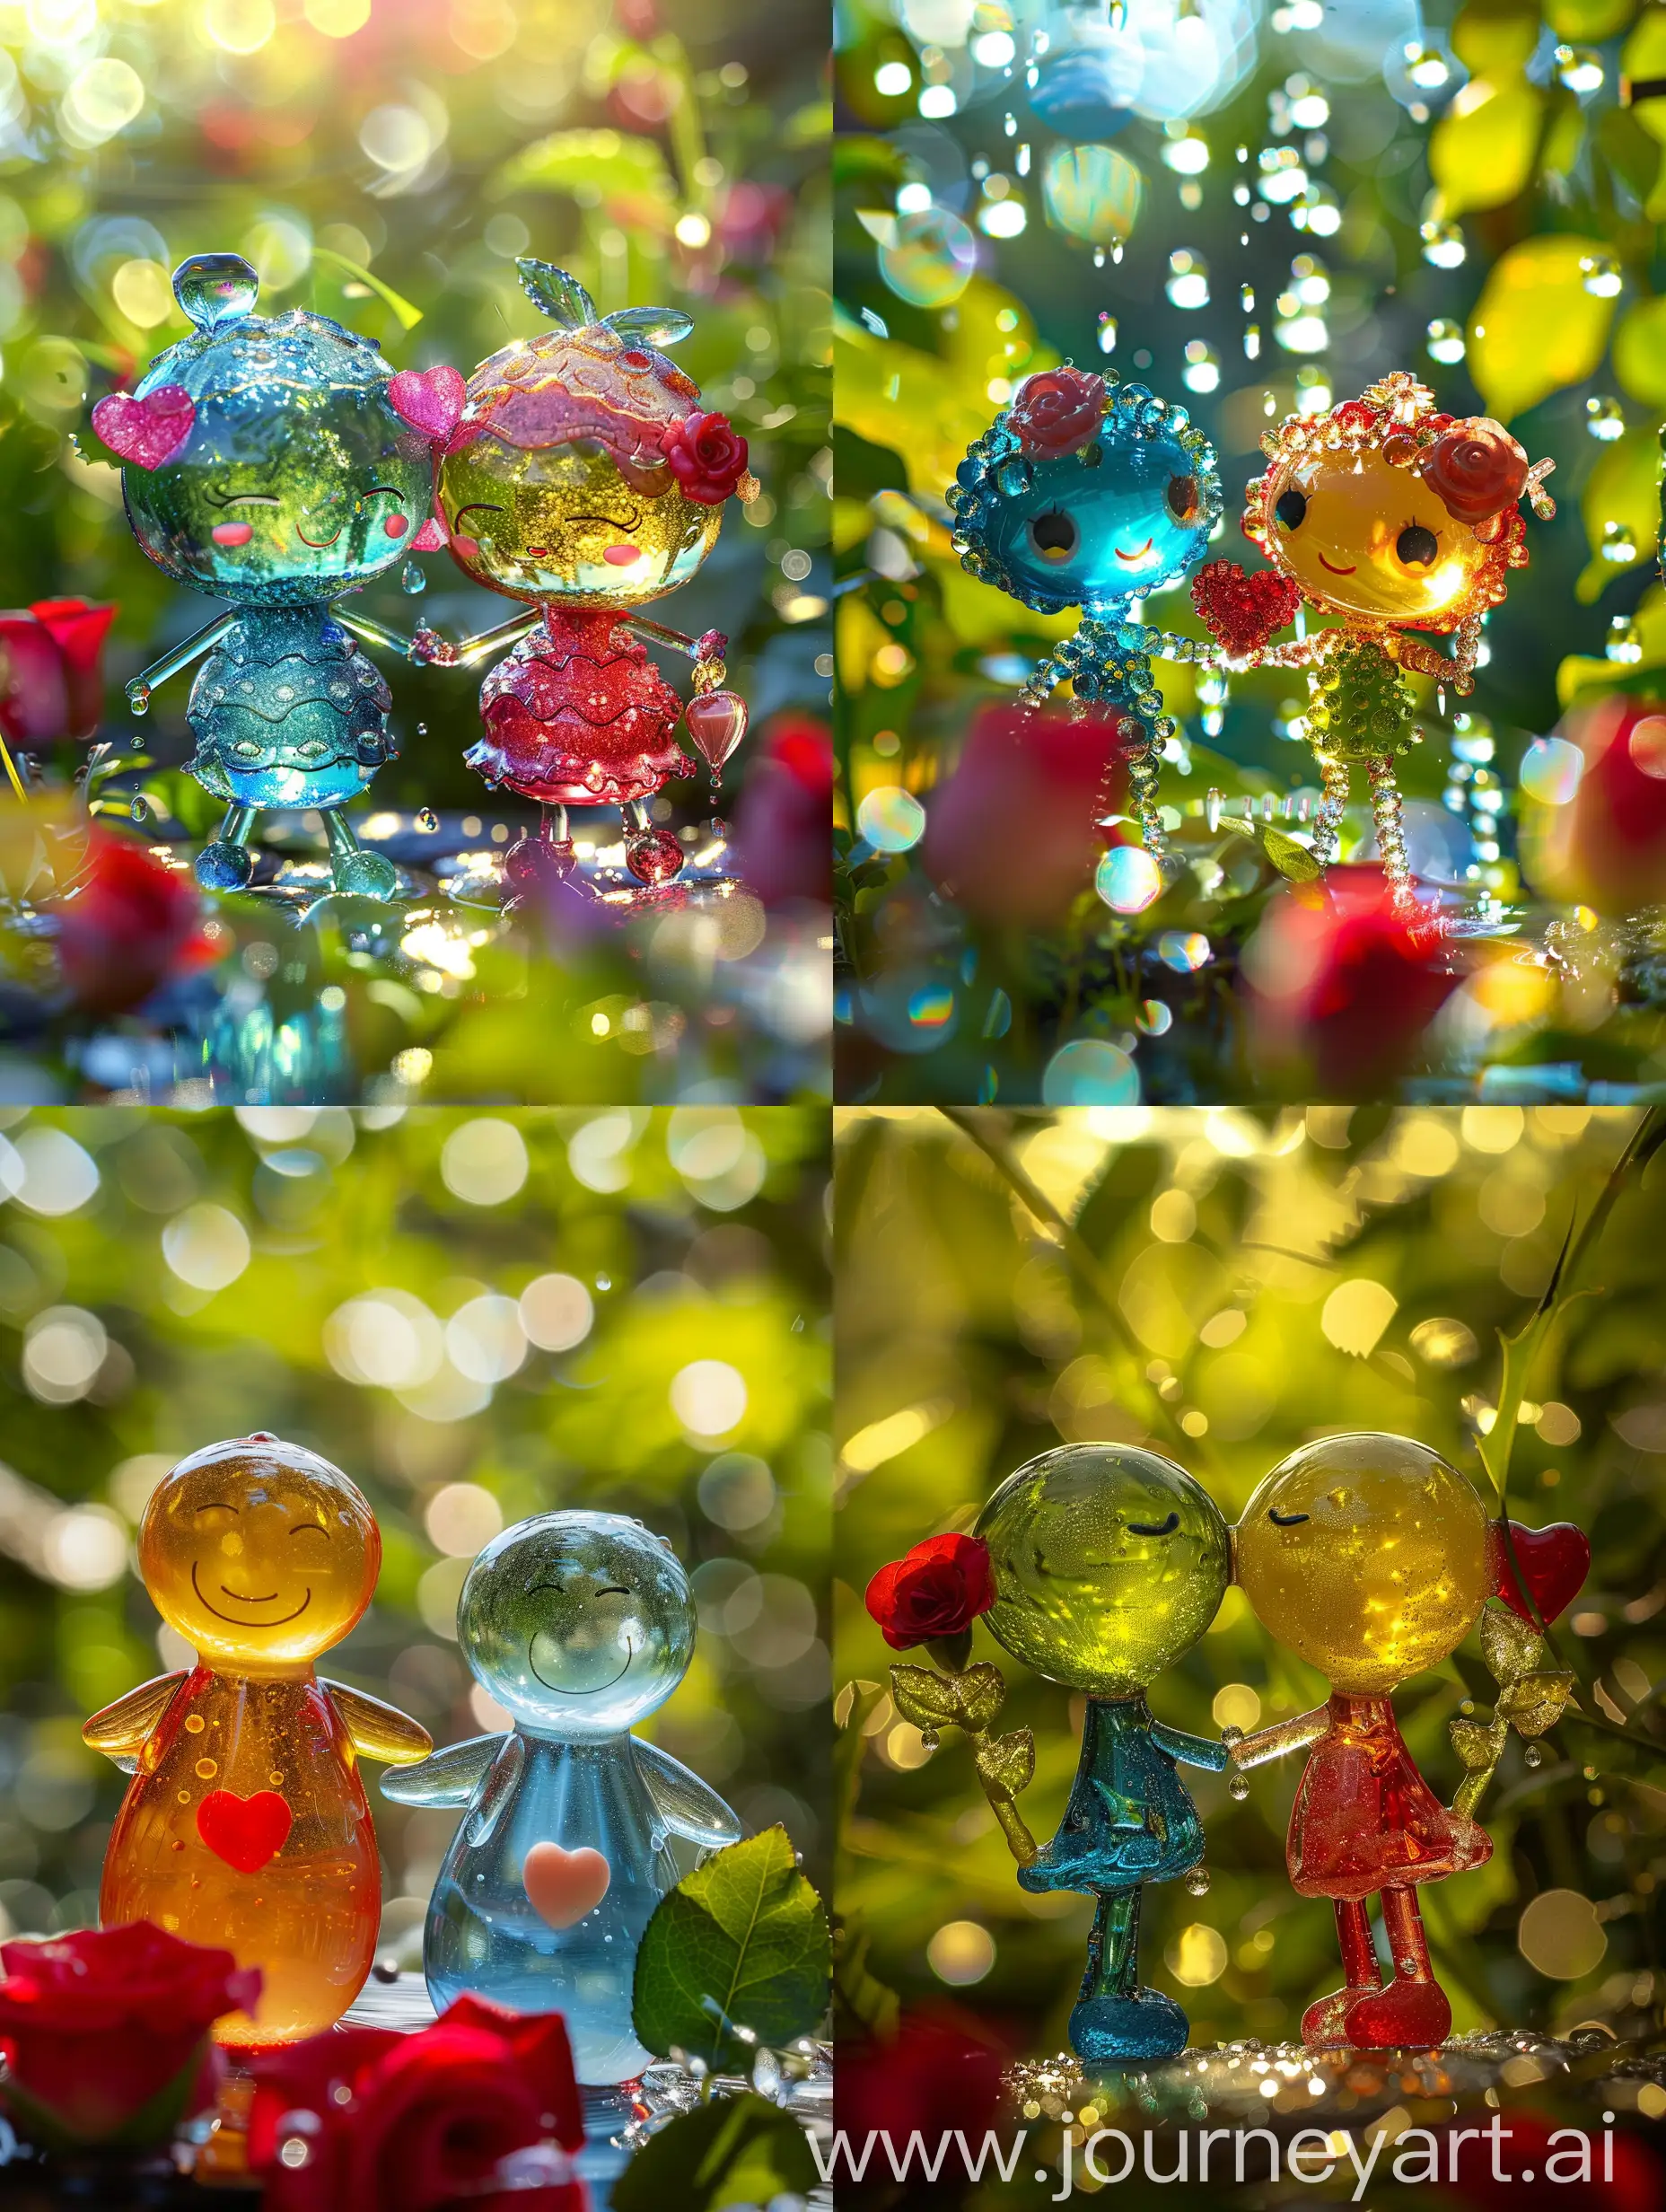 Joyful-Doll-Characters-Holding-Hands-in-Colorful-Crystal-Glass-Setting